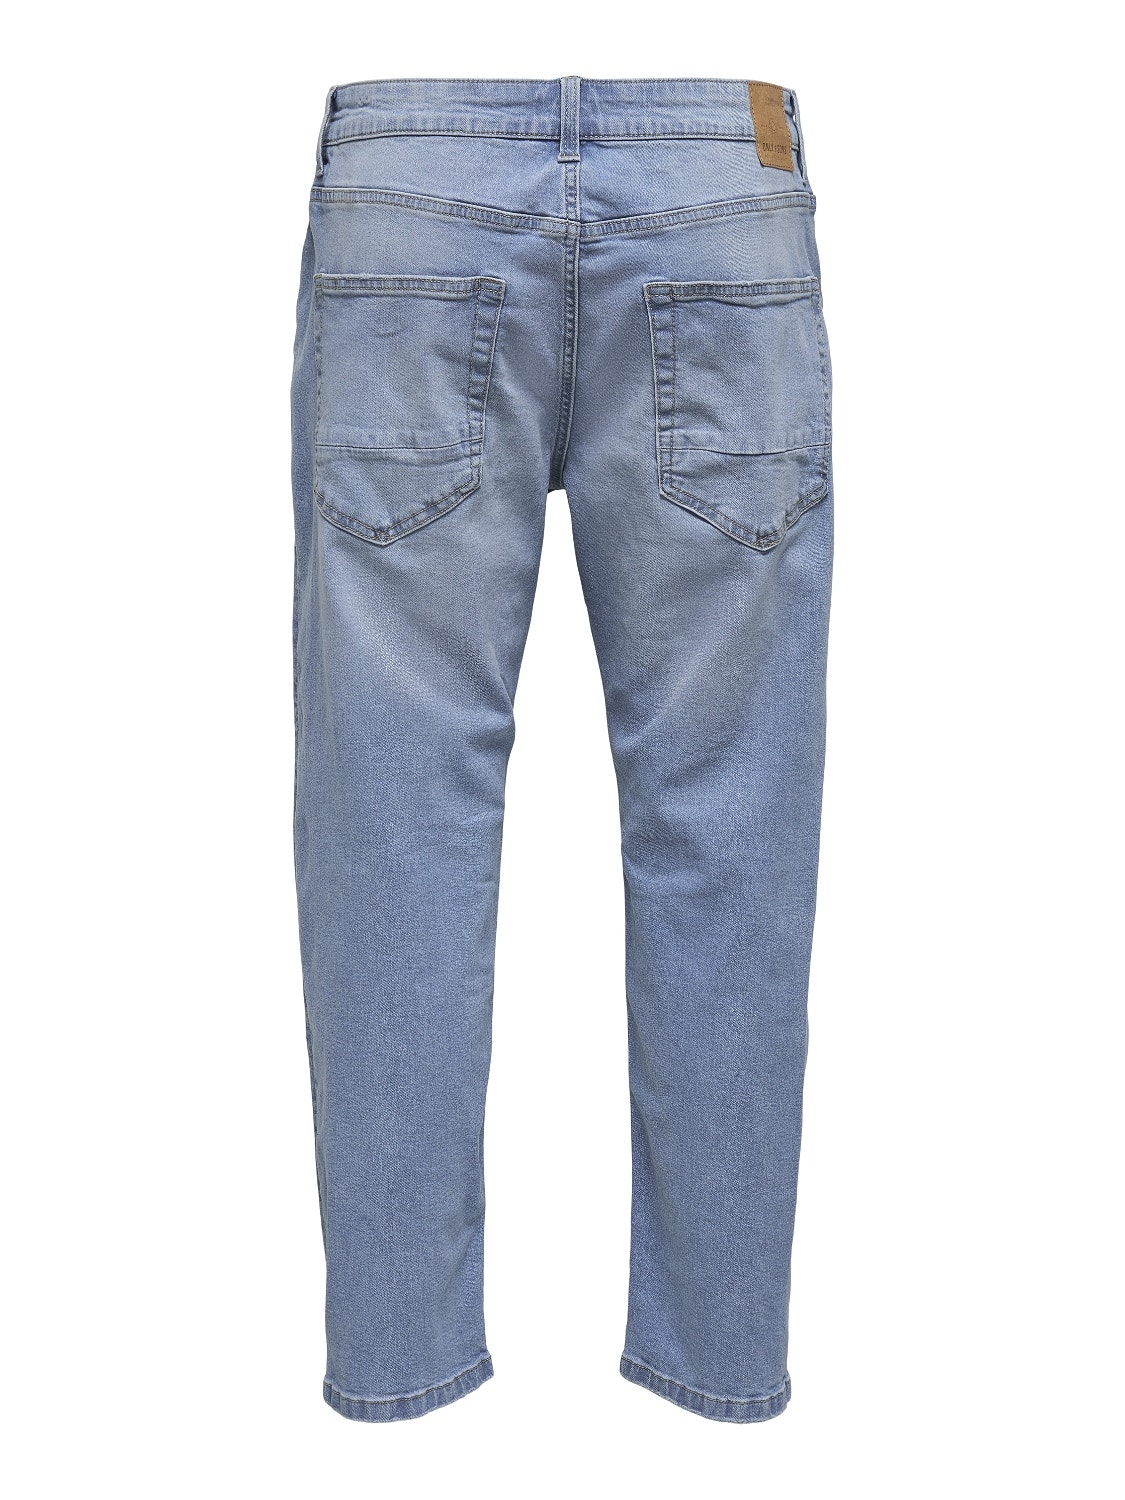 ONLY & SONS Tapered Fit Mid rise Jeans -Blue Denim - 22020775